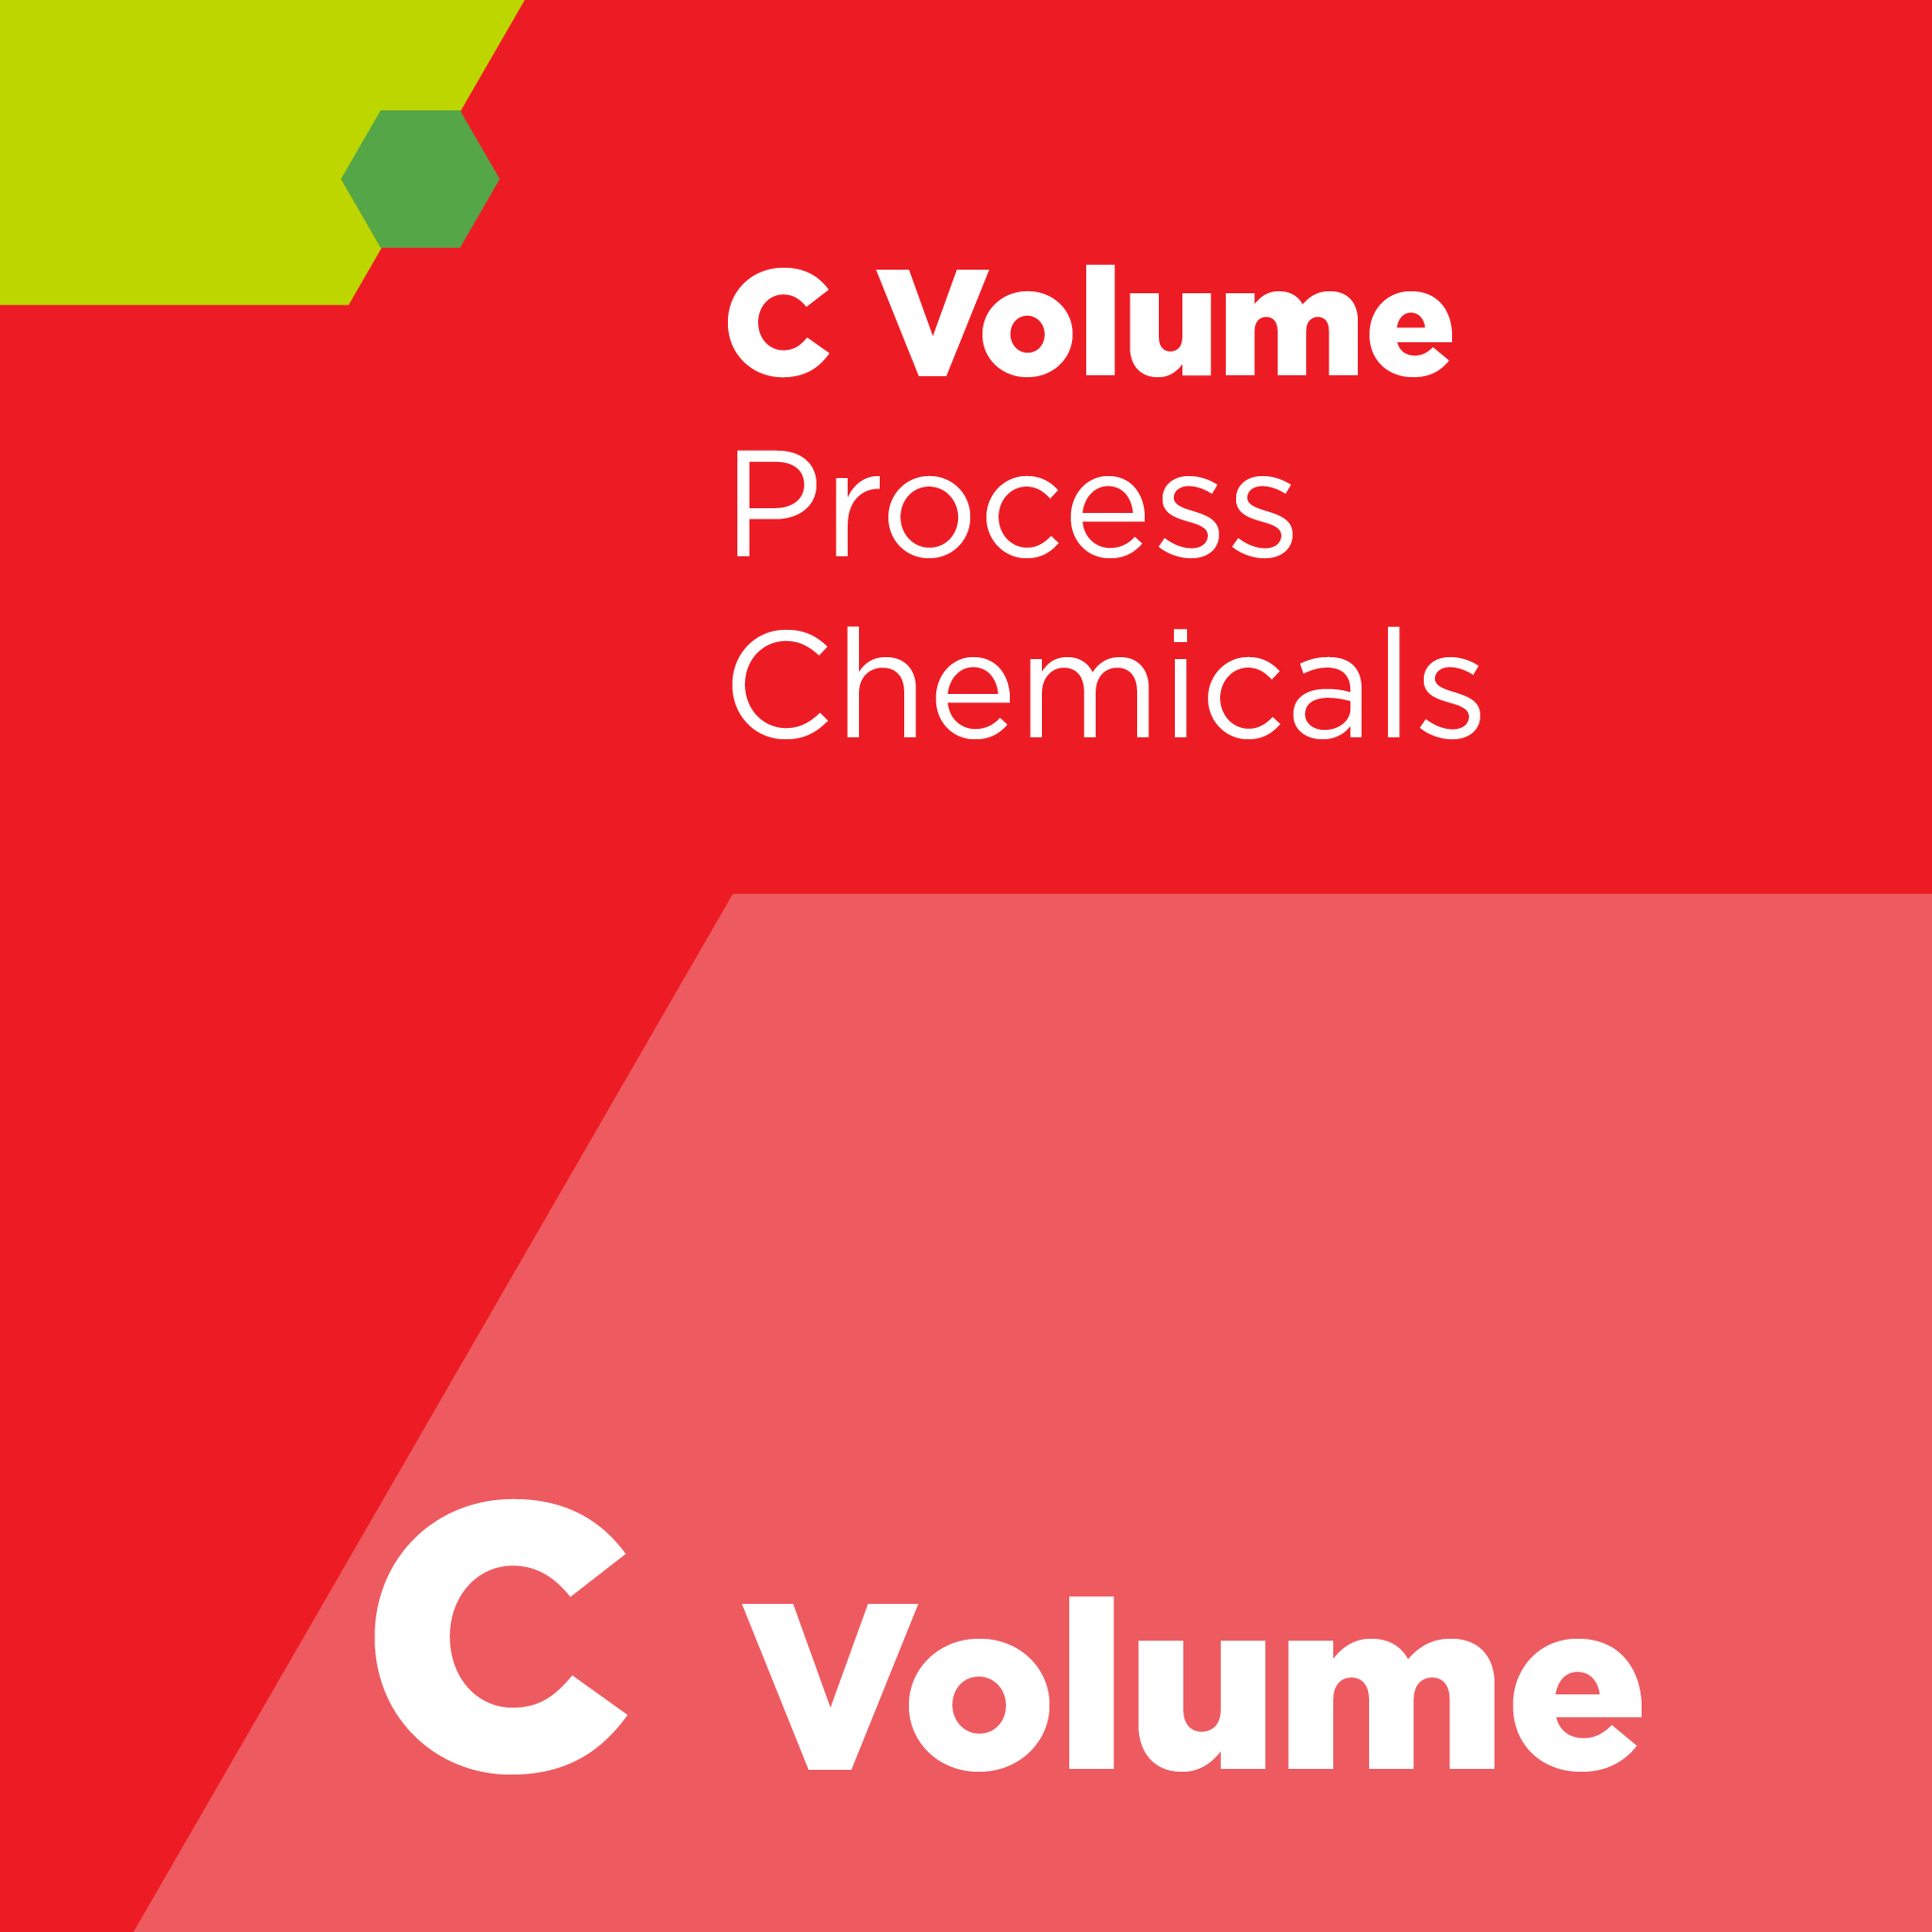 C02900 - SEMI C29 - Specification and Guide for 4.9% Hydrofluoric Acid (10:1 v/v)